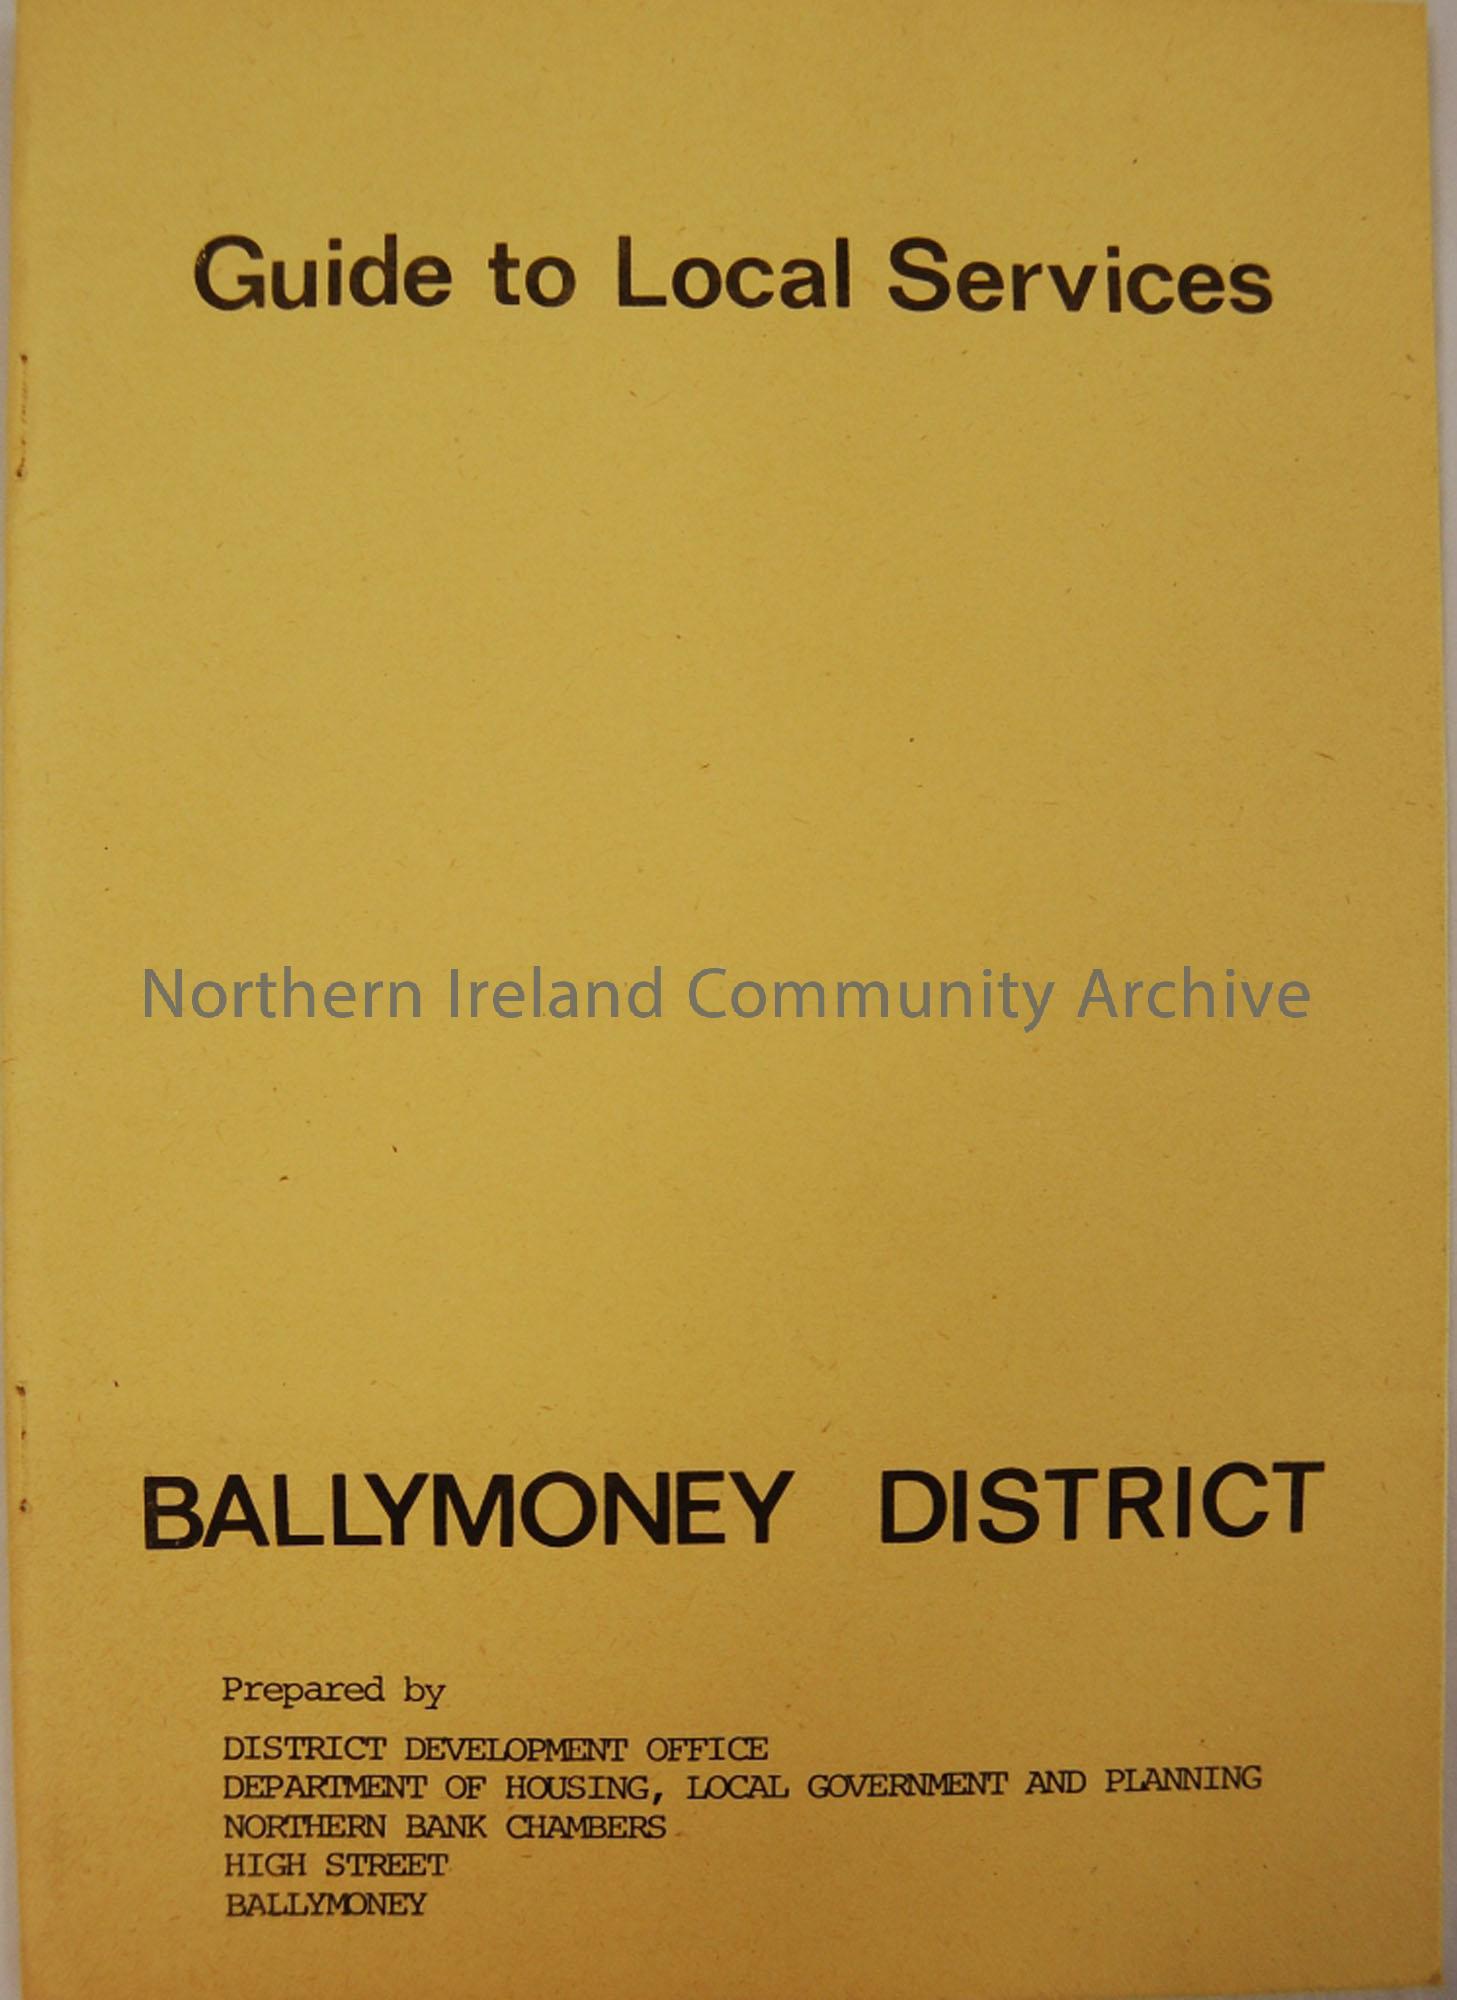 Guide to Local Services, Ballymoney District. March 1975